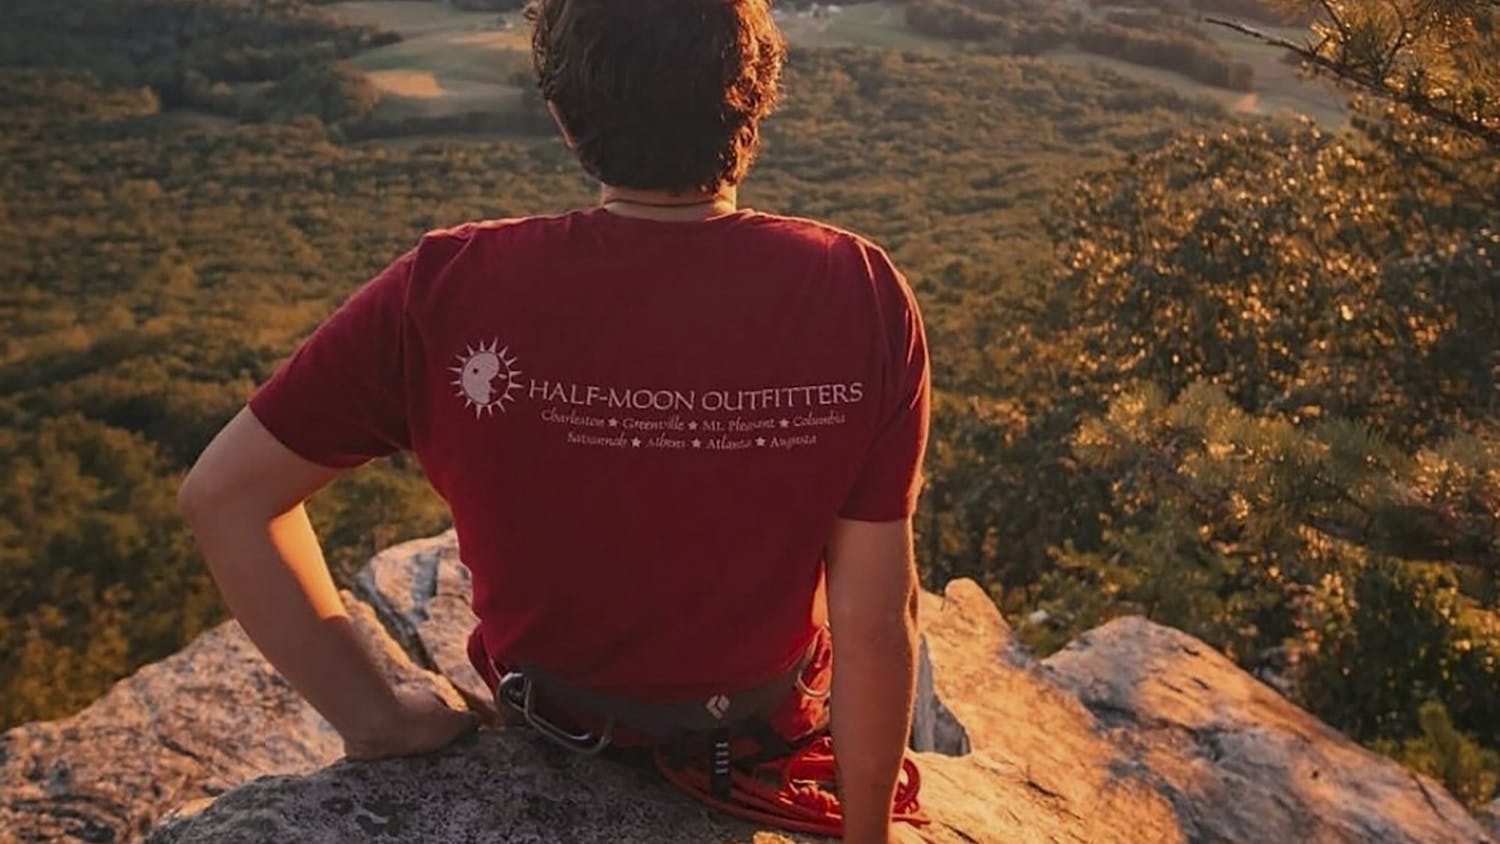 The Carolina Mountaineering and White Water Club can be found scaling mountains and exploring the outdoors to get to beautiful summits of the Carolina mountains.